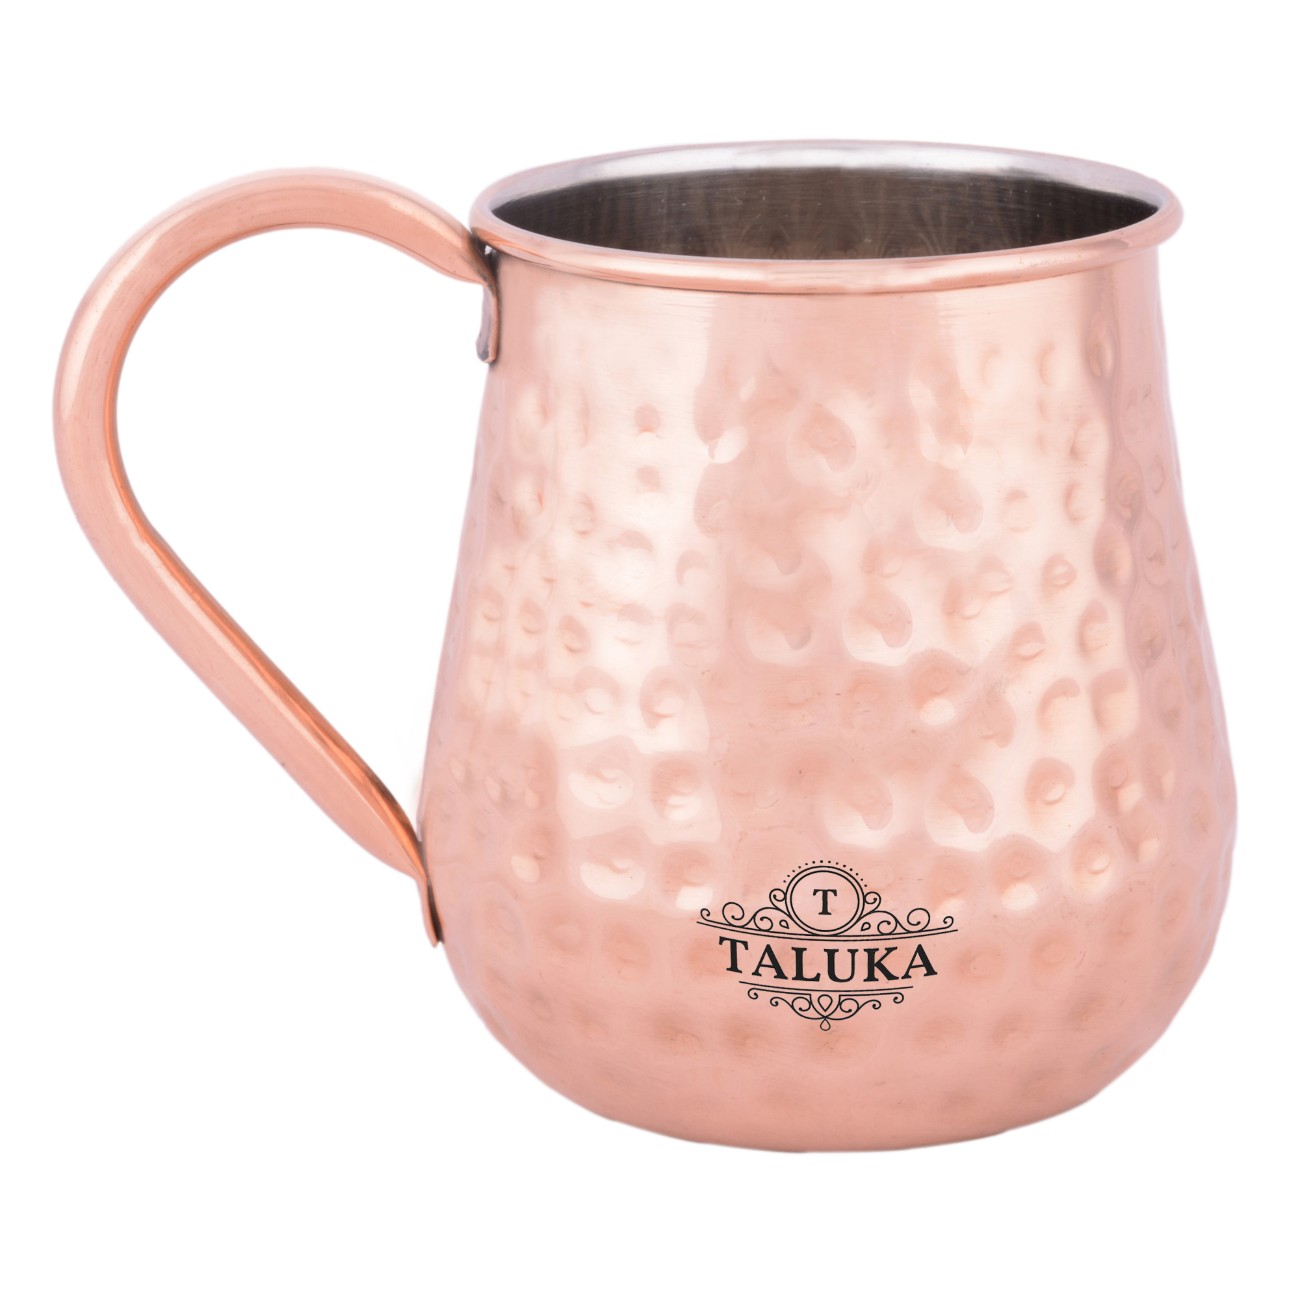 Copper Hammered Nickel Moscow Mule Wine Beer Mug For Bar Ware